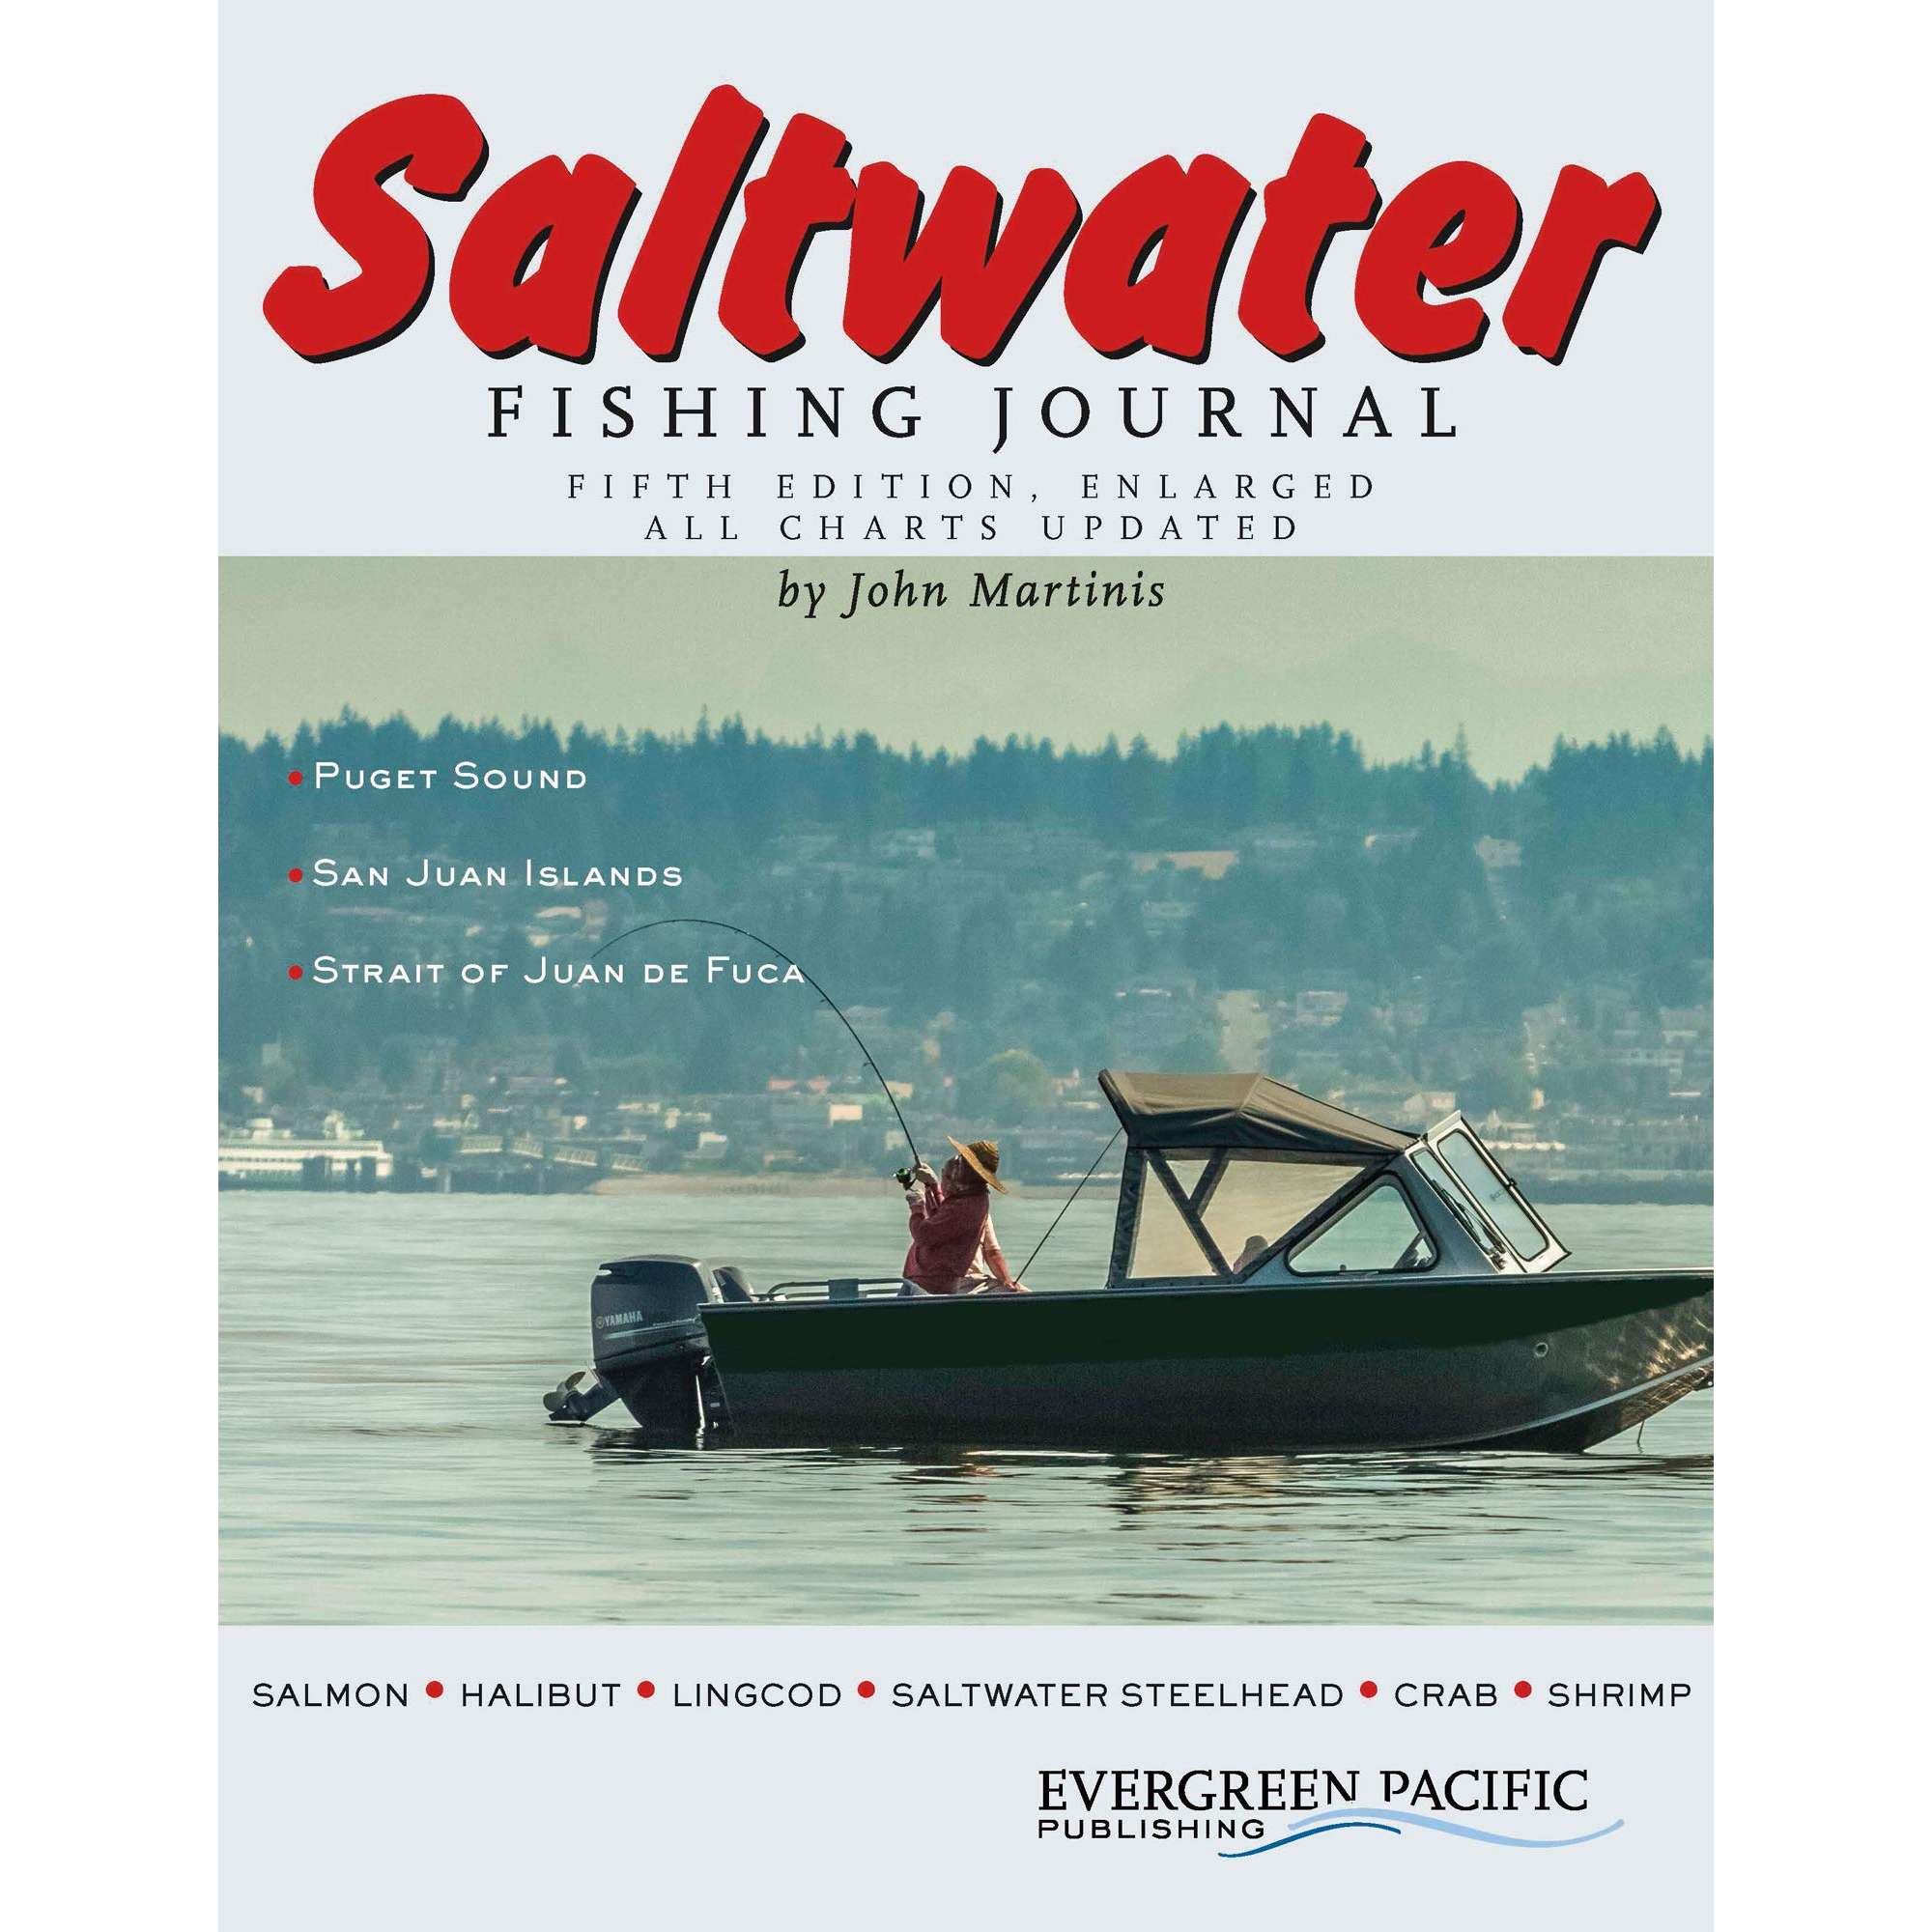 Outdoors, Camping & Travel :: All Outdoors Books :: Fishing :: Saltwater  Fishing Journal 5th Edition - Paradise Cay - Wholesale Books, Gifts,  Navigational Charts, On Demand Publishing